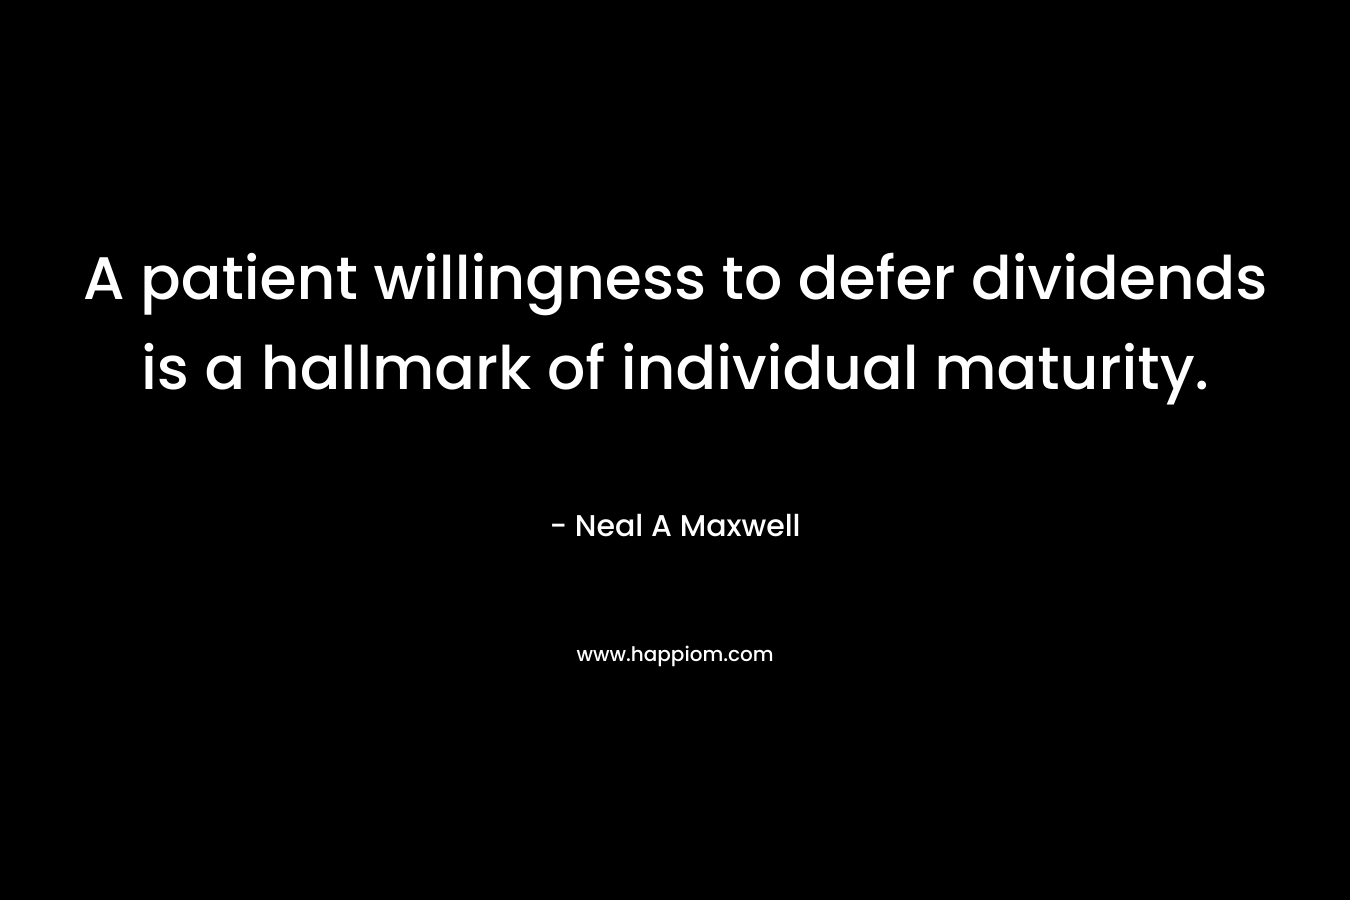 A patient willingness to defer dividends is a hallmark of individual maturity. – Neal A Maxwell